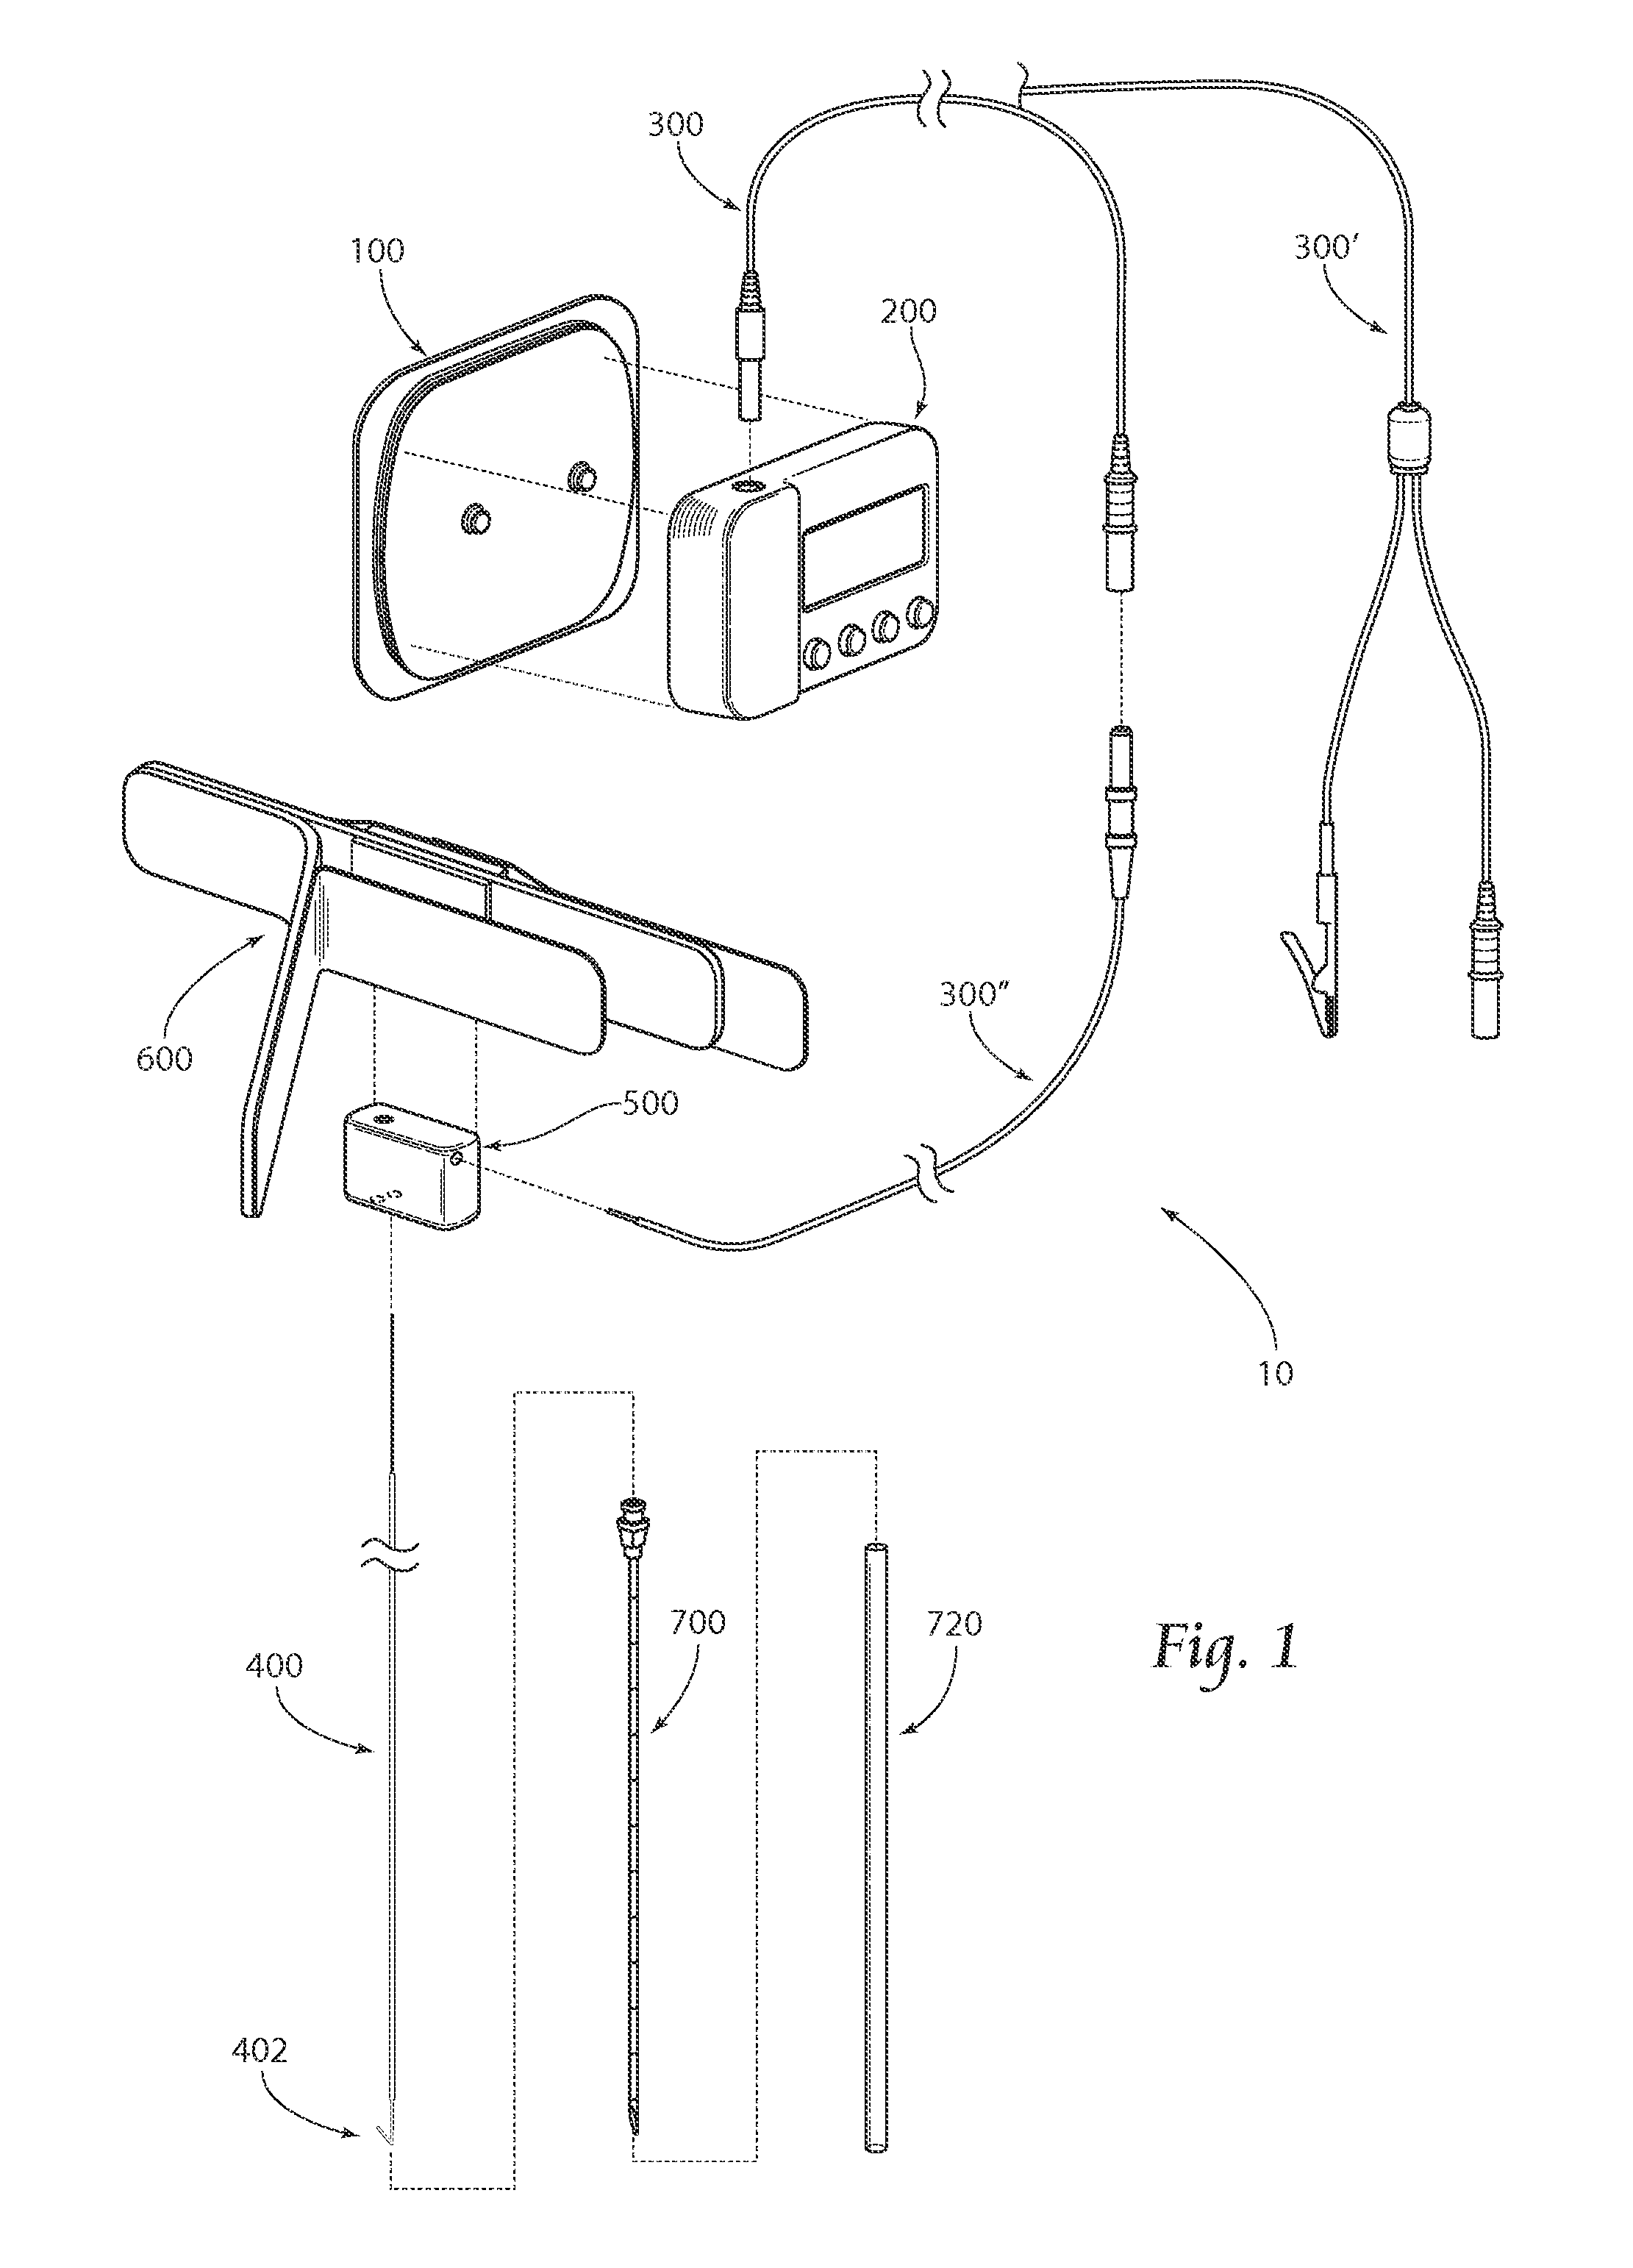 Systems and methods for percutaneous electrical stimulation